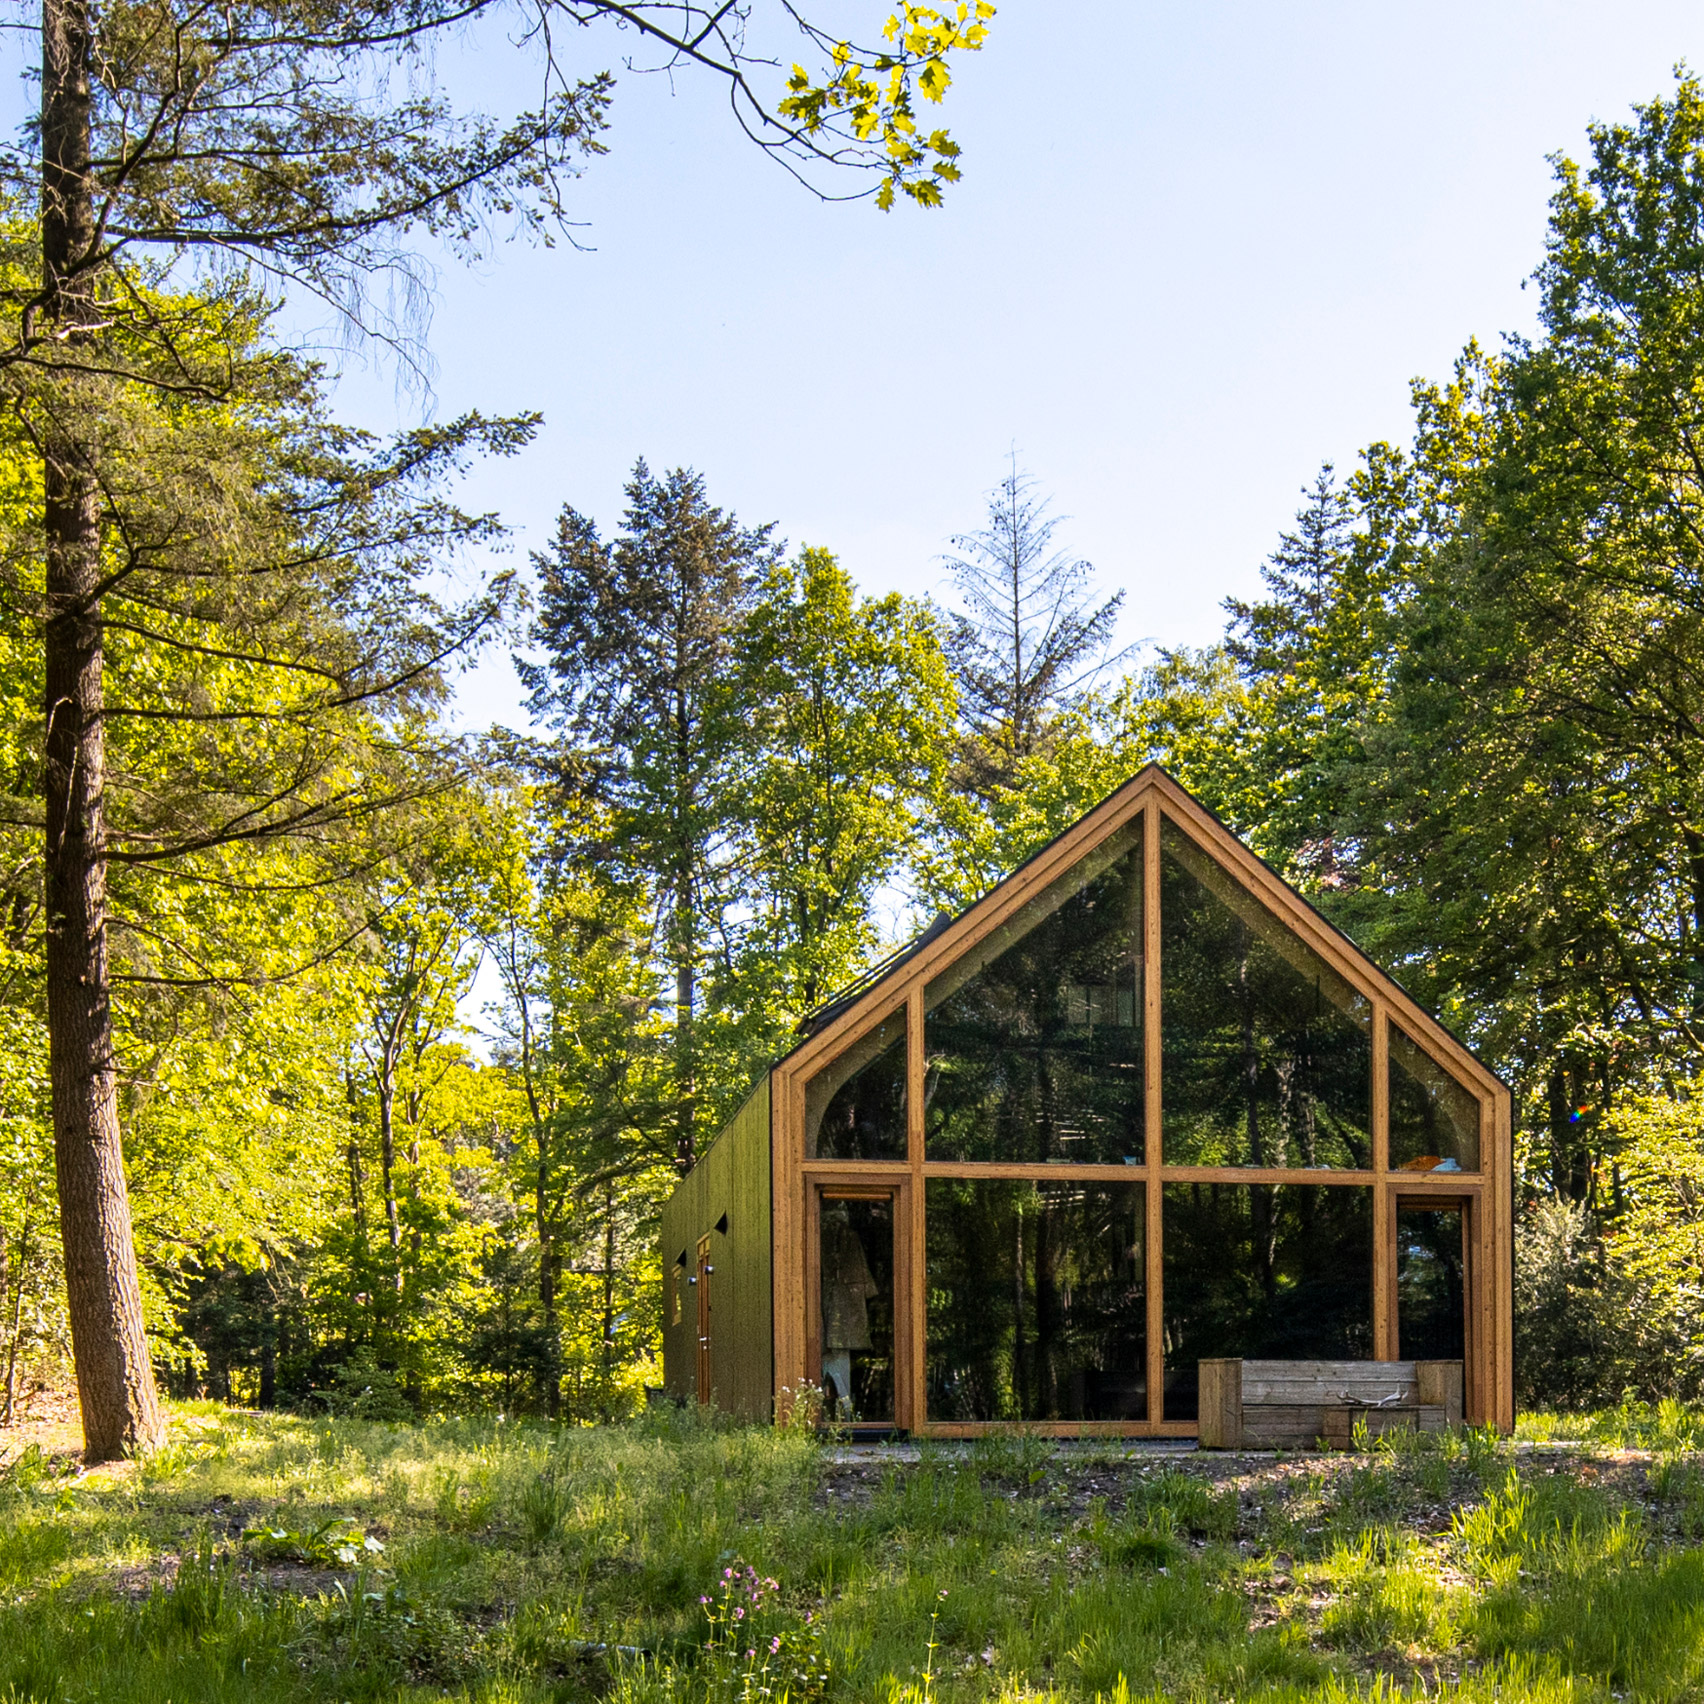 The wooden Indigo cabin in the Netherlands